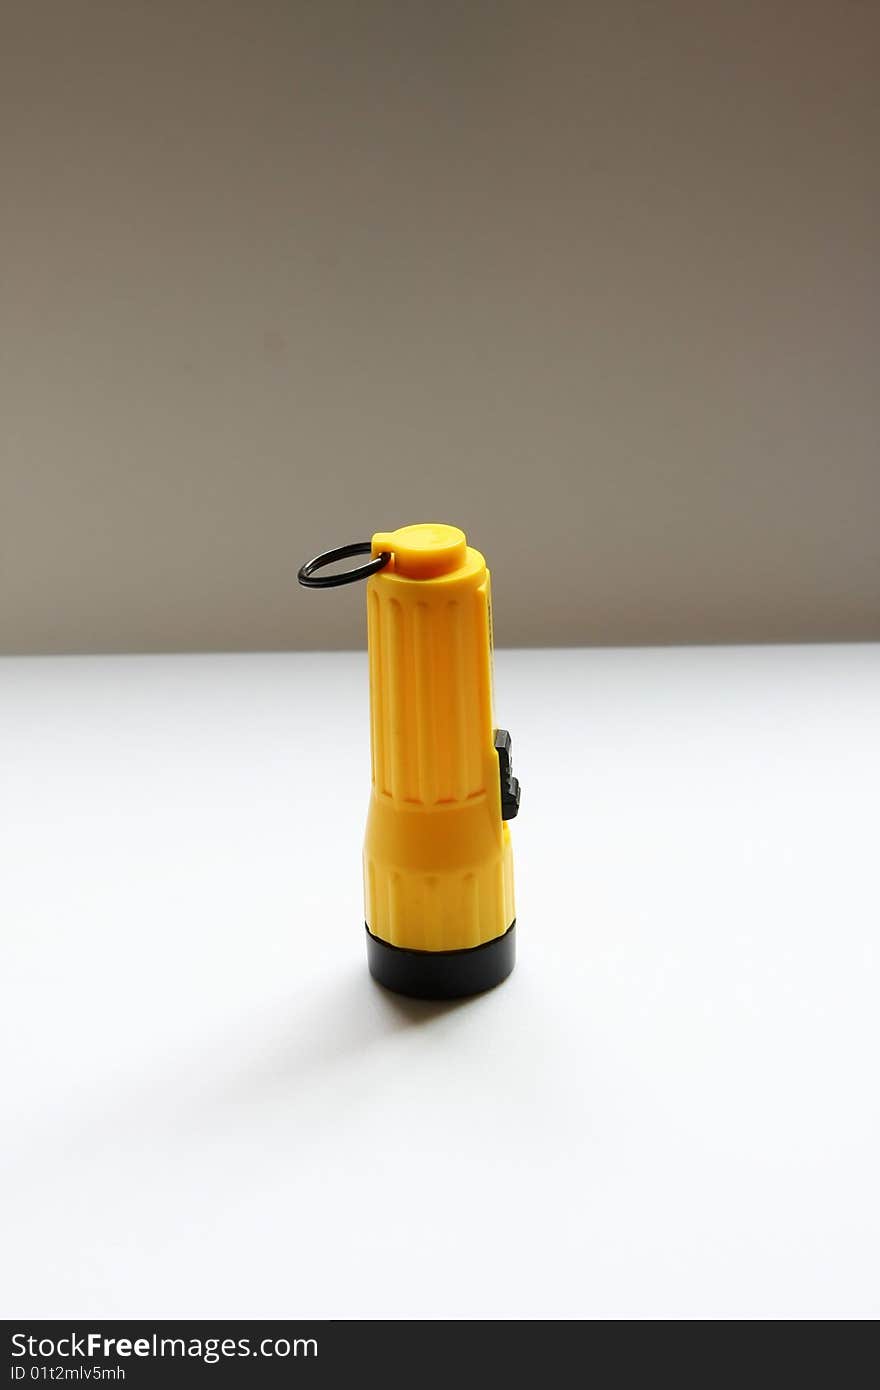 This is a little flashlight